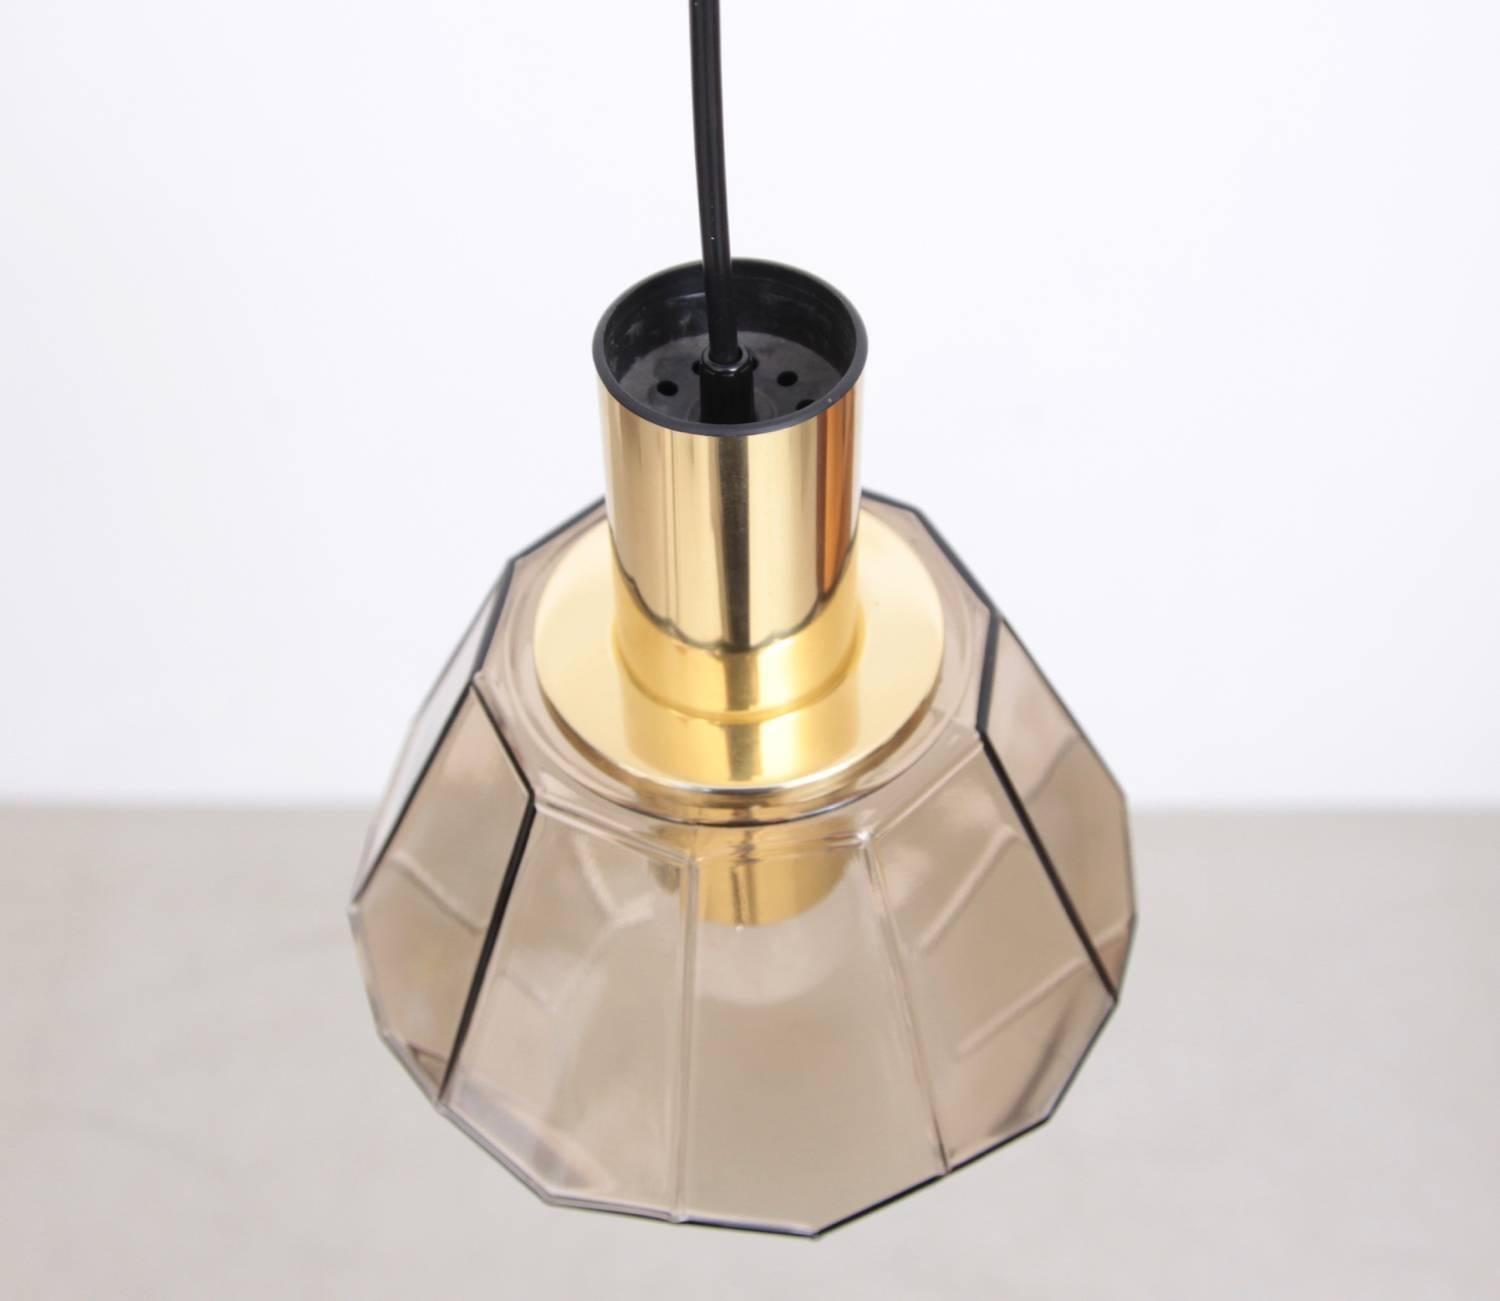 Lantern style smoked glass and brass pendant lamp by Glashütte Limburg, Germany, from the 1960s in excellent condition. 12 pieces available.

Measures: 1 x E27.